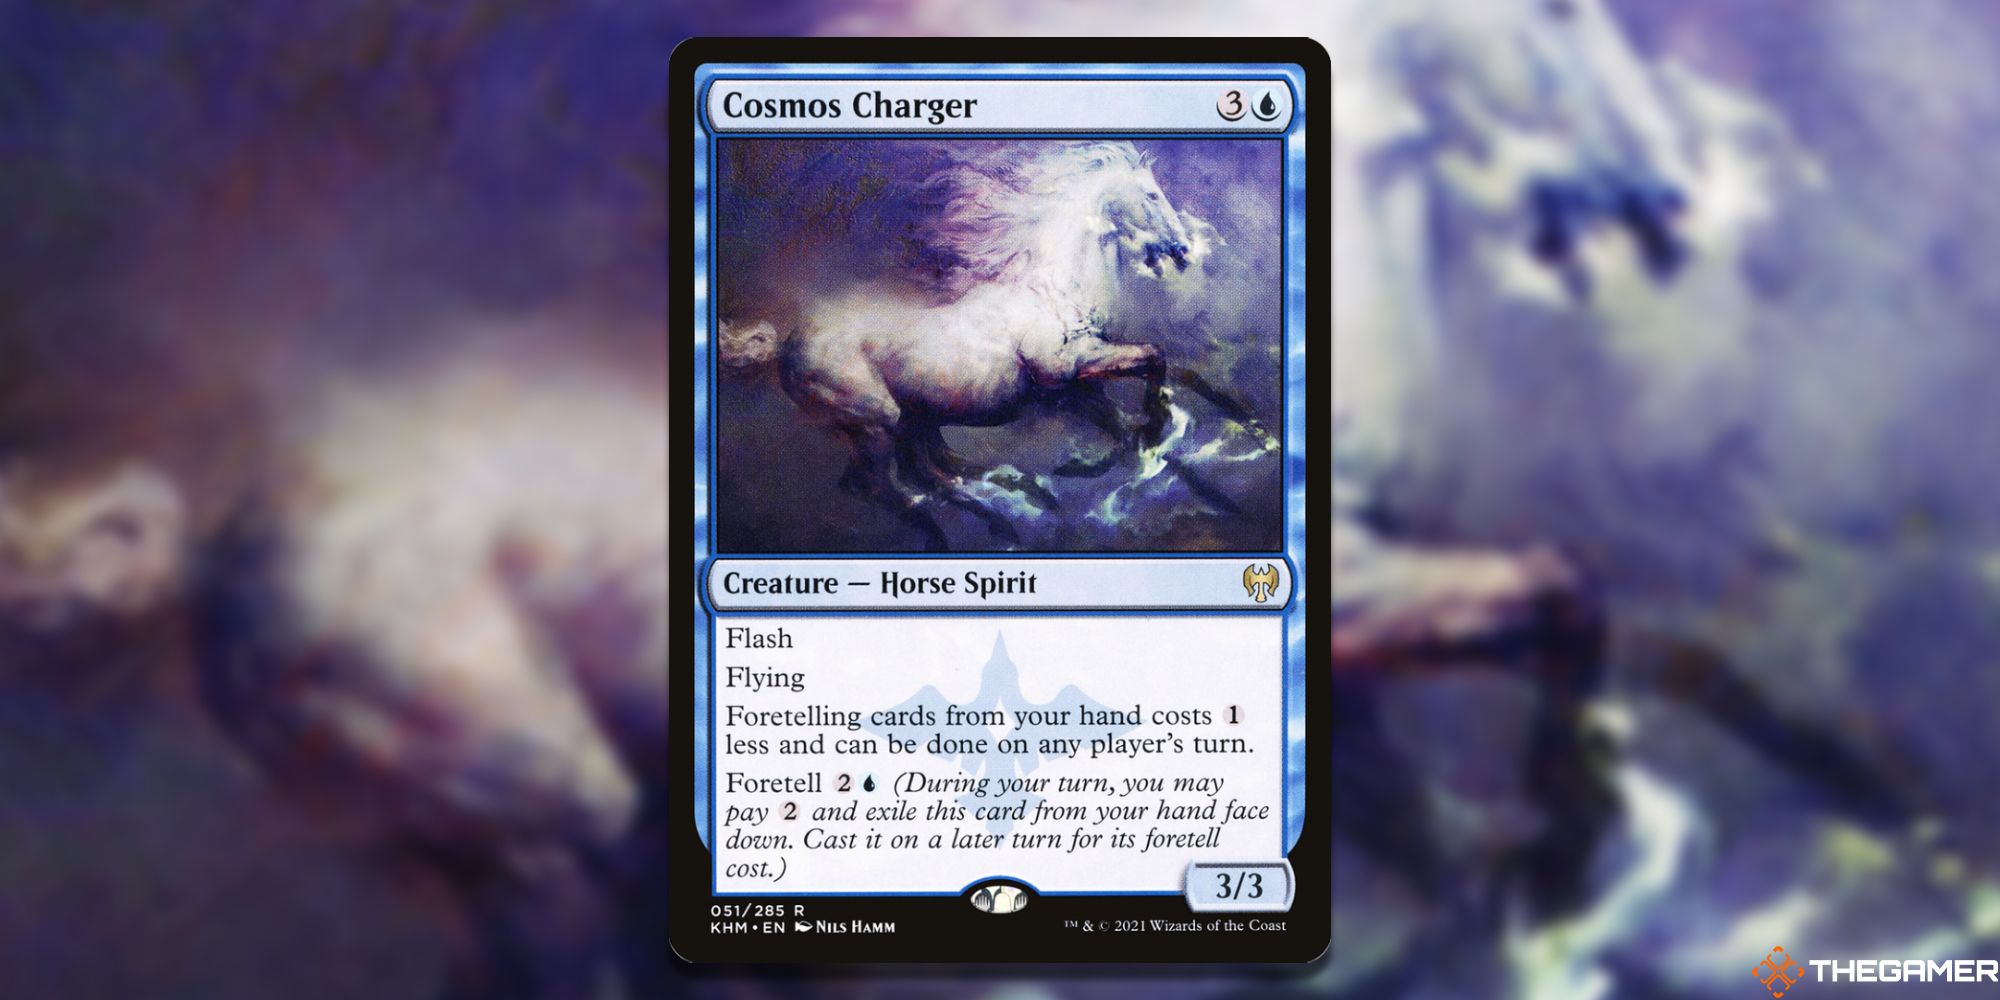     An image of the Cosmos Charger card in Magic: The Gathering, with artwork by Nils Hamm